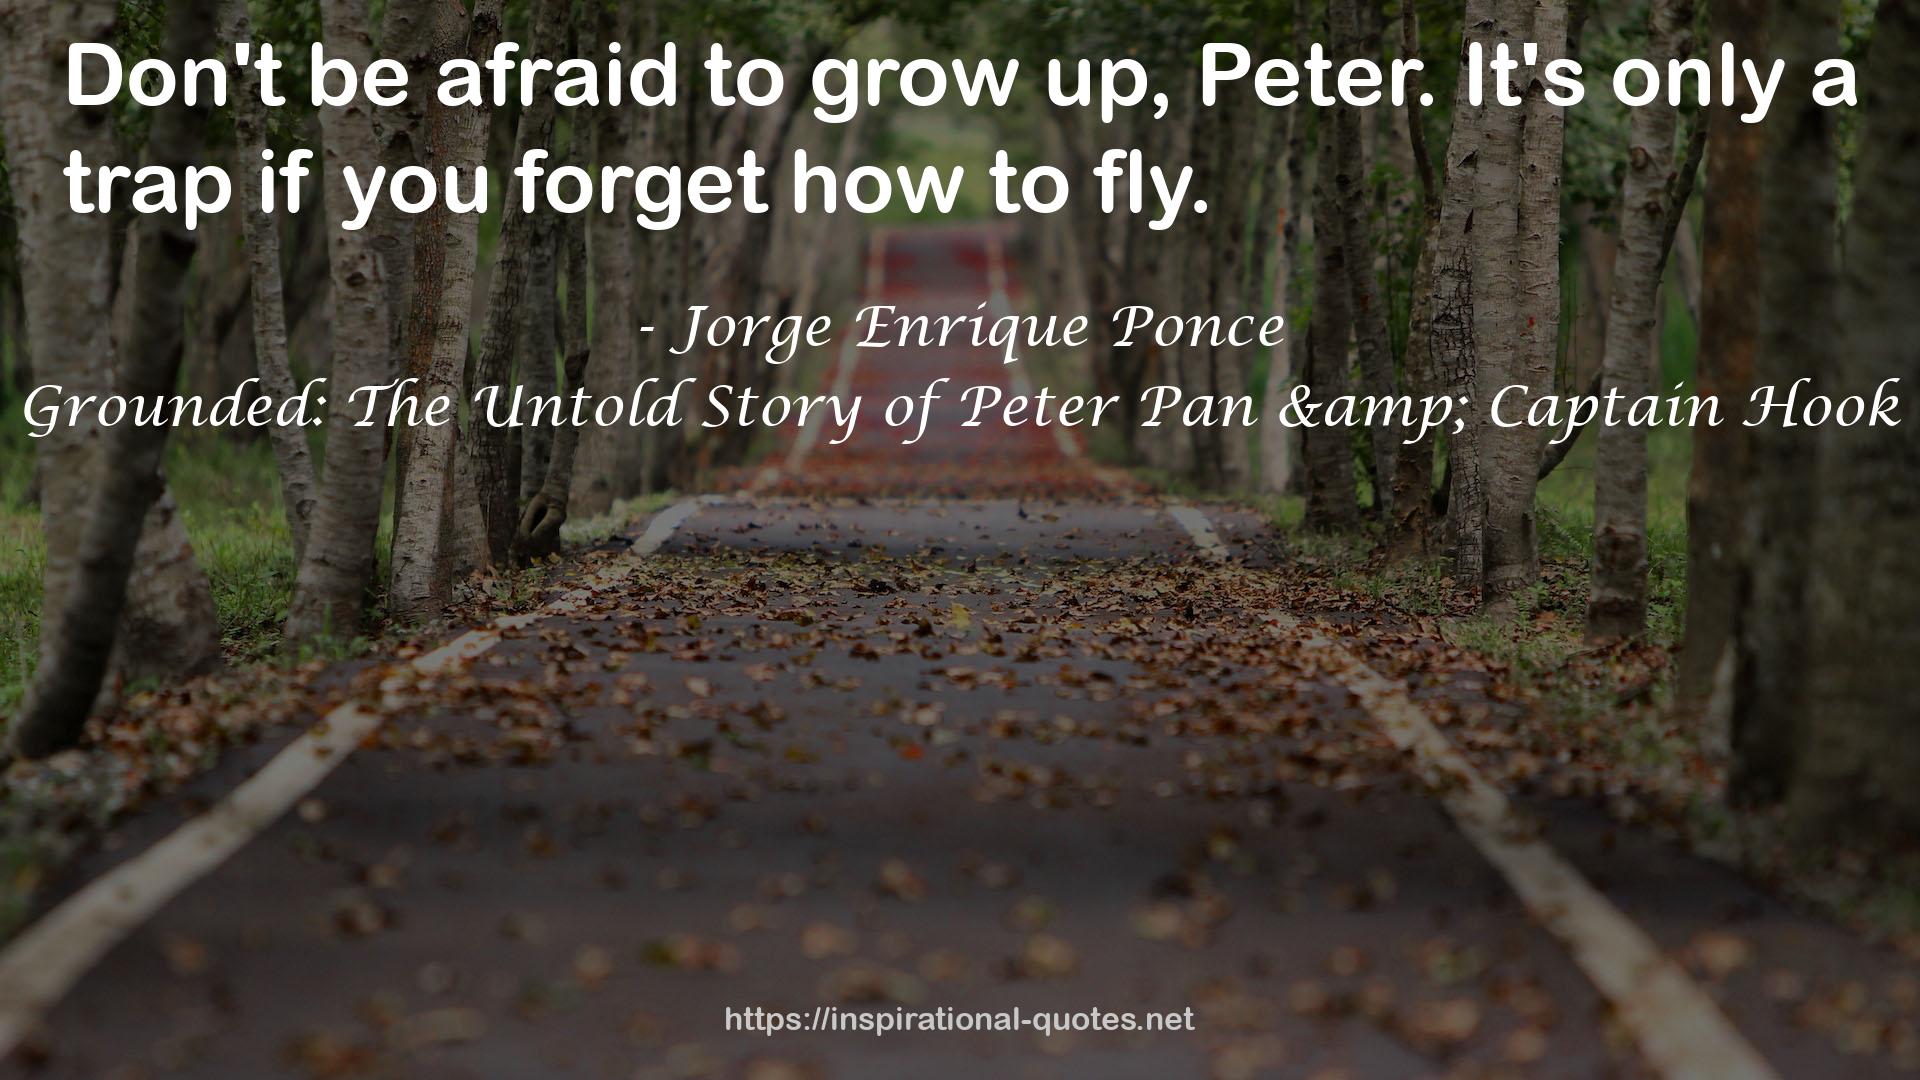 Grounded: The Untold Story of Peter Pan & Captain Hook QUOTES